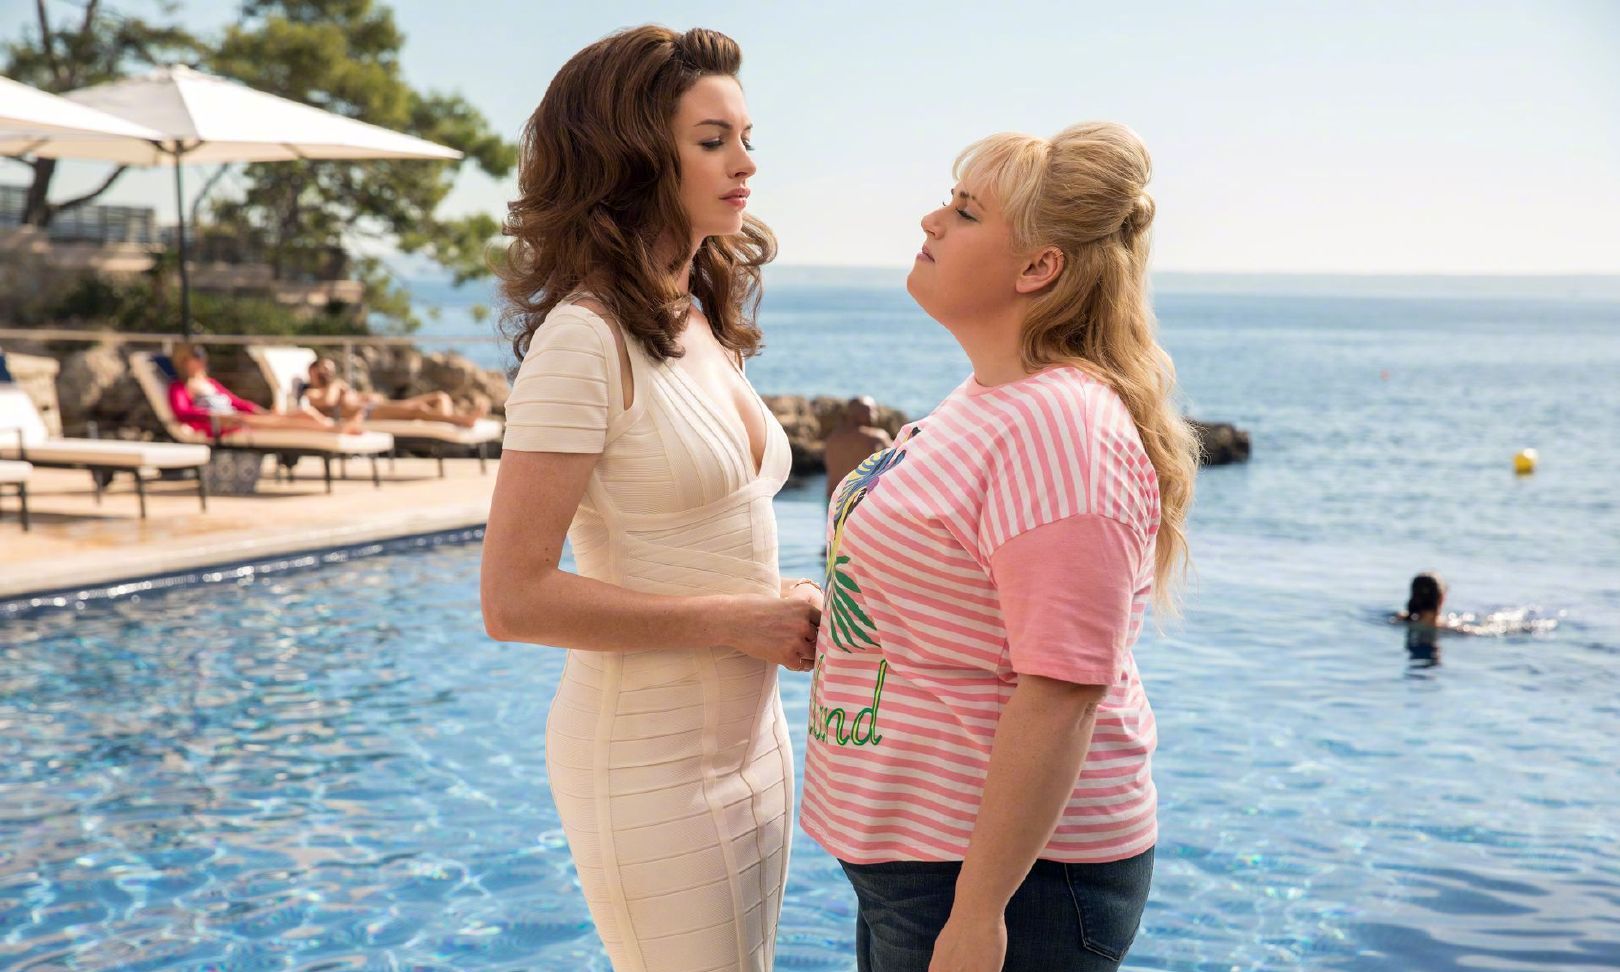 The Hustle Anne Hathaway and Rebel Wilson